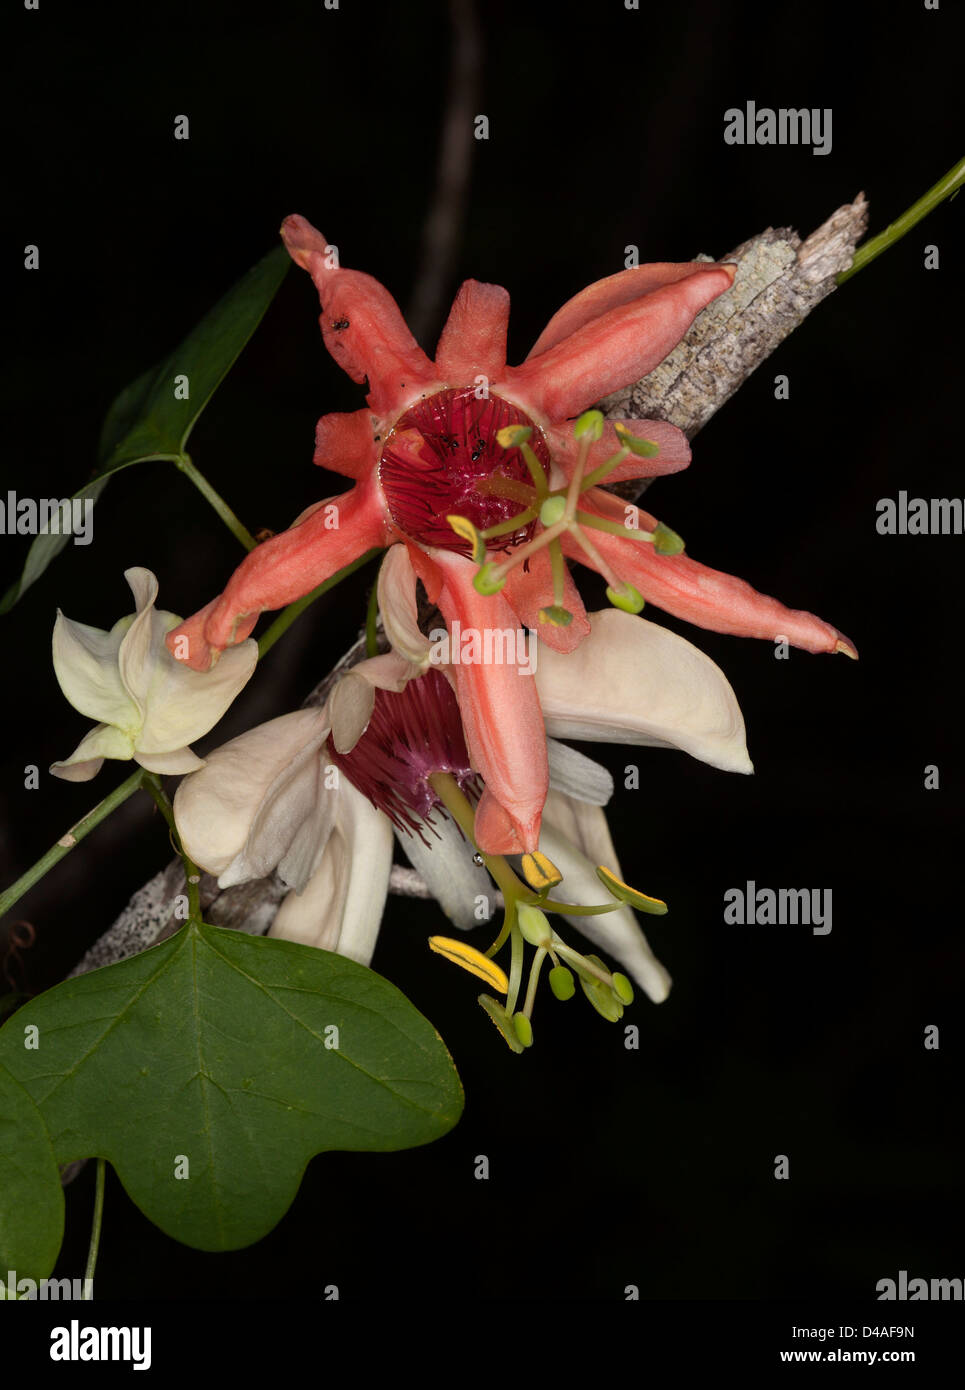 Salmon red flower, white flower, and green foliage of Passiflora aurantia -Australian native  passionflower with dark background Stock Photo